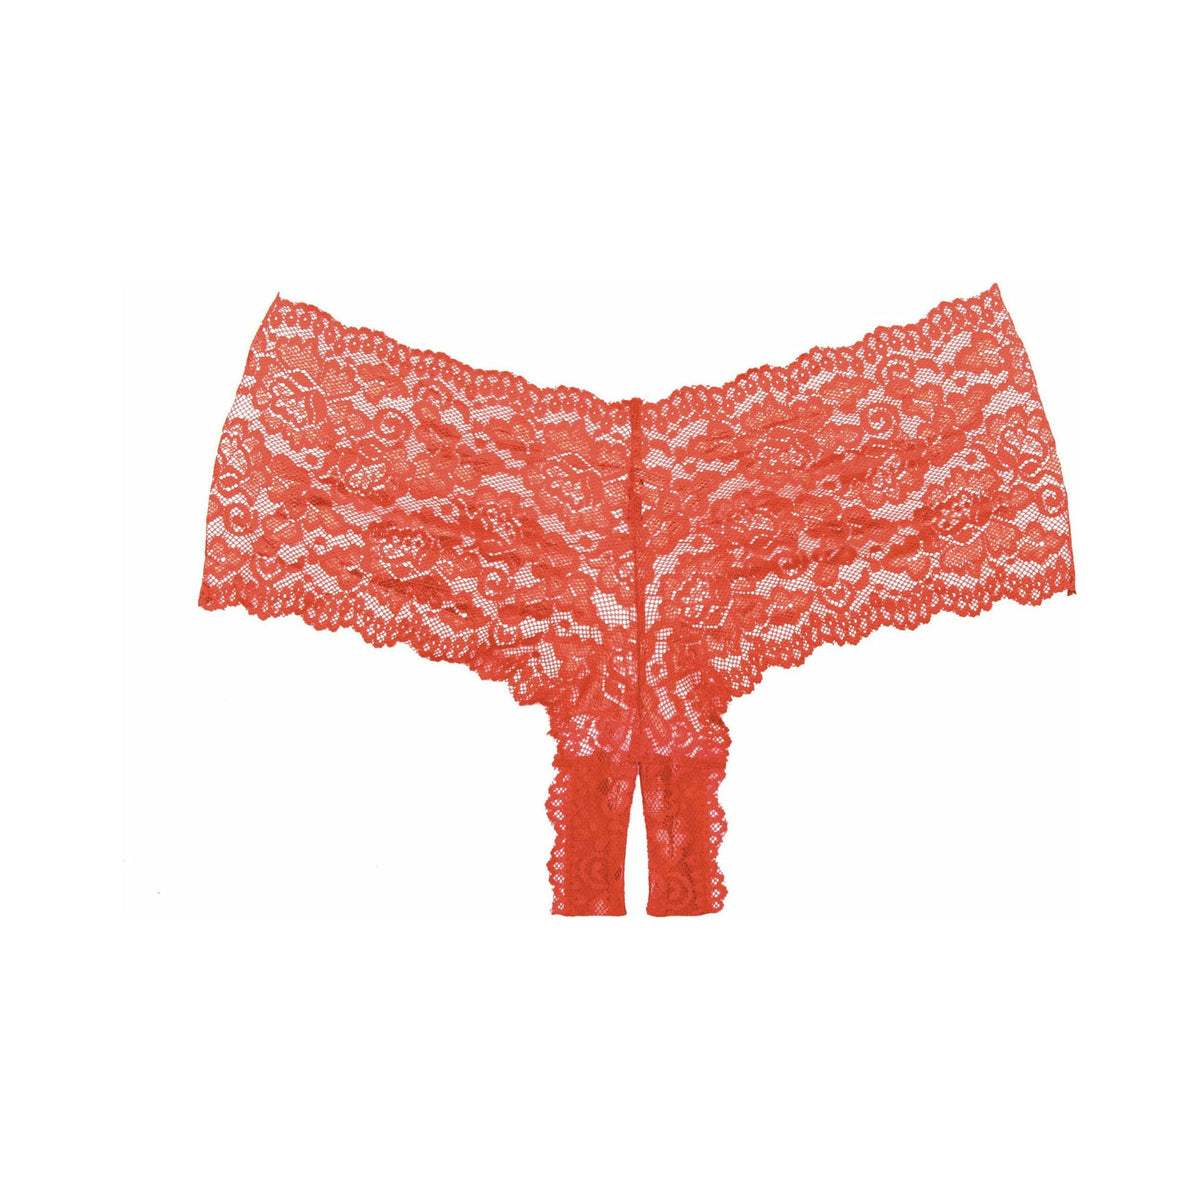 Allure Adore – Candy Apple Panty – Red – One Size